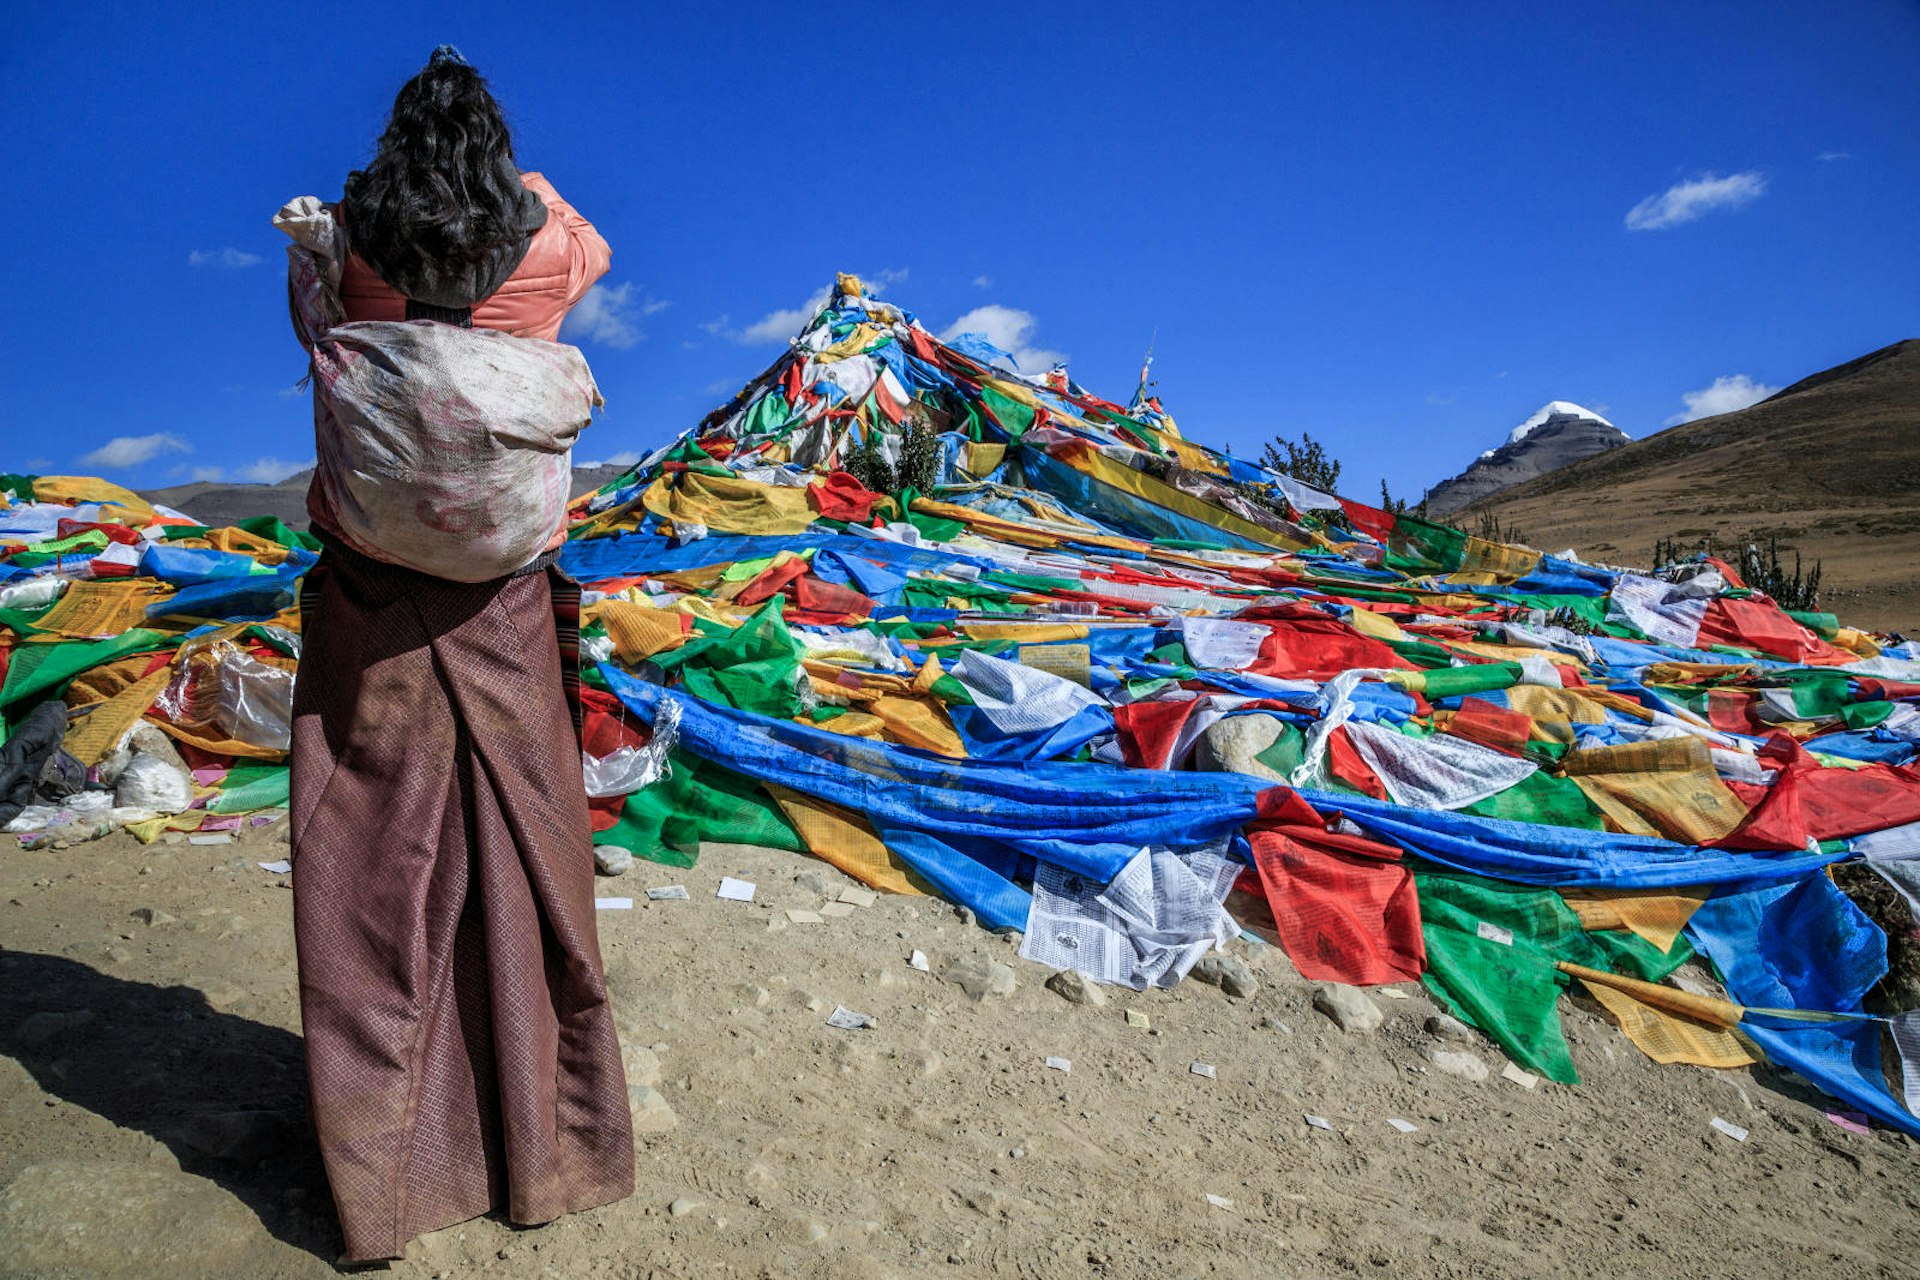 Multi-coloured Tibetan prayer flags cover a small hill. A woman is standing with her back to the camera praying; she has dark hair and is wearing a traditional long skirt, warm jacket and has a bag slung over her shoulder. The snow-capped peak of Mount Kailash is visible in the background.